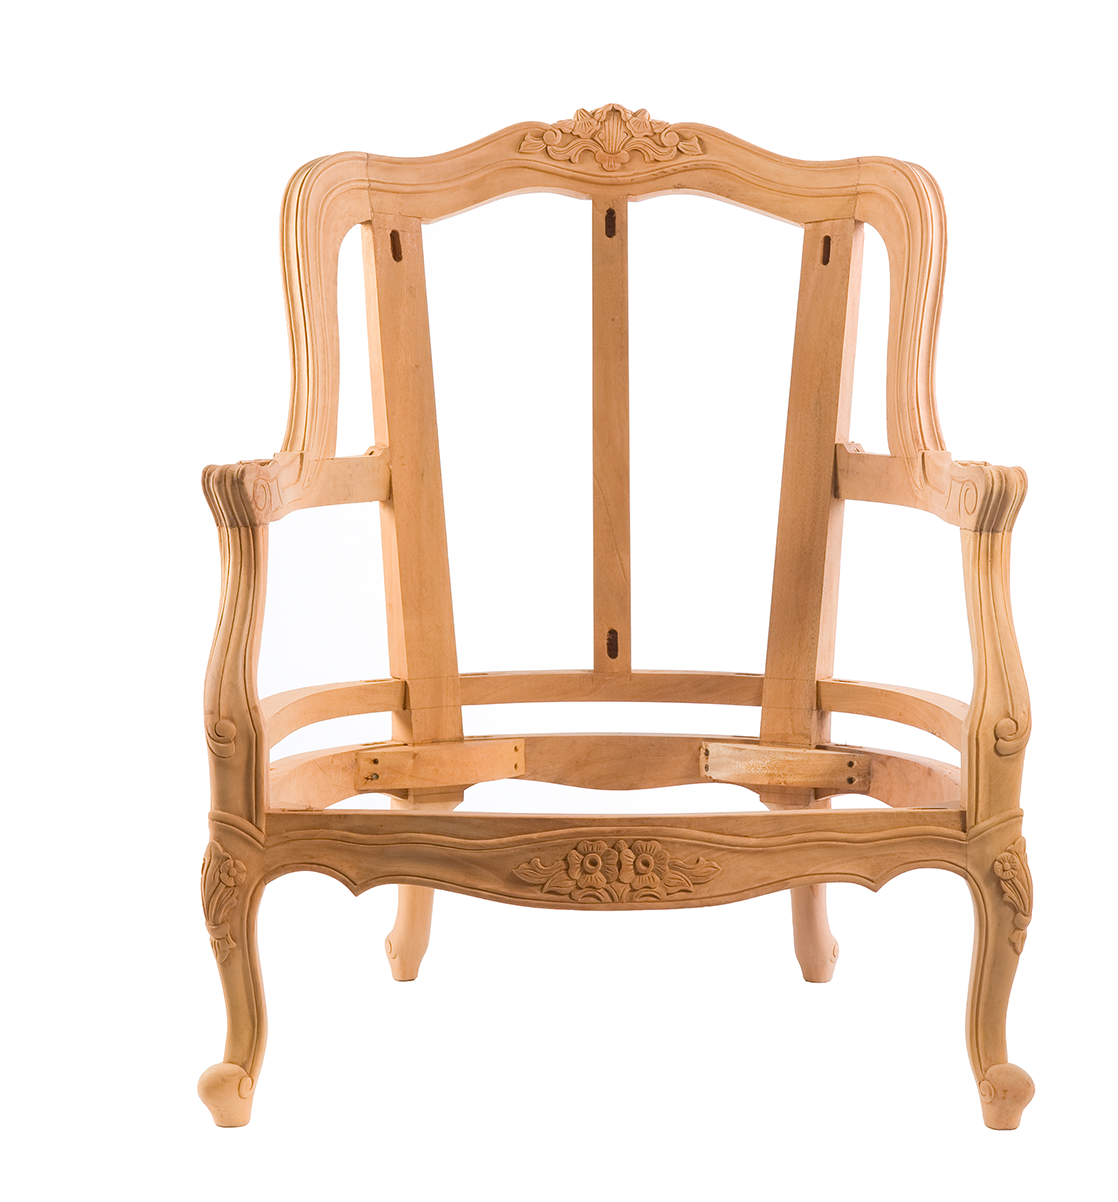 New Reproduction carved traditional mahogany armchair available for reupholstery and painting your choice of colour - Louis Salon Armchair